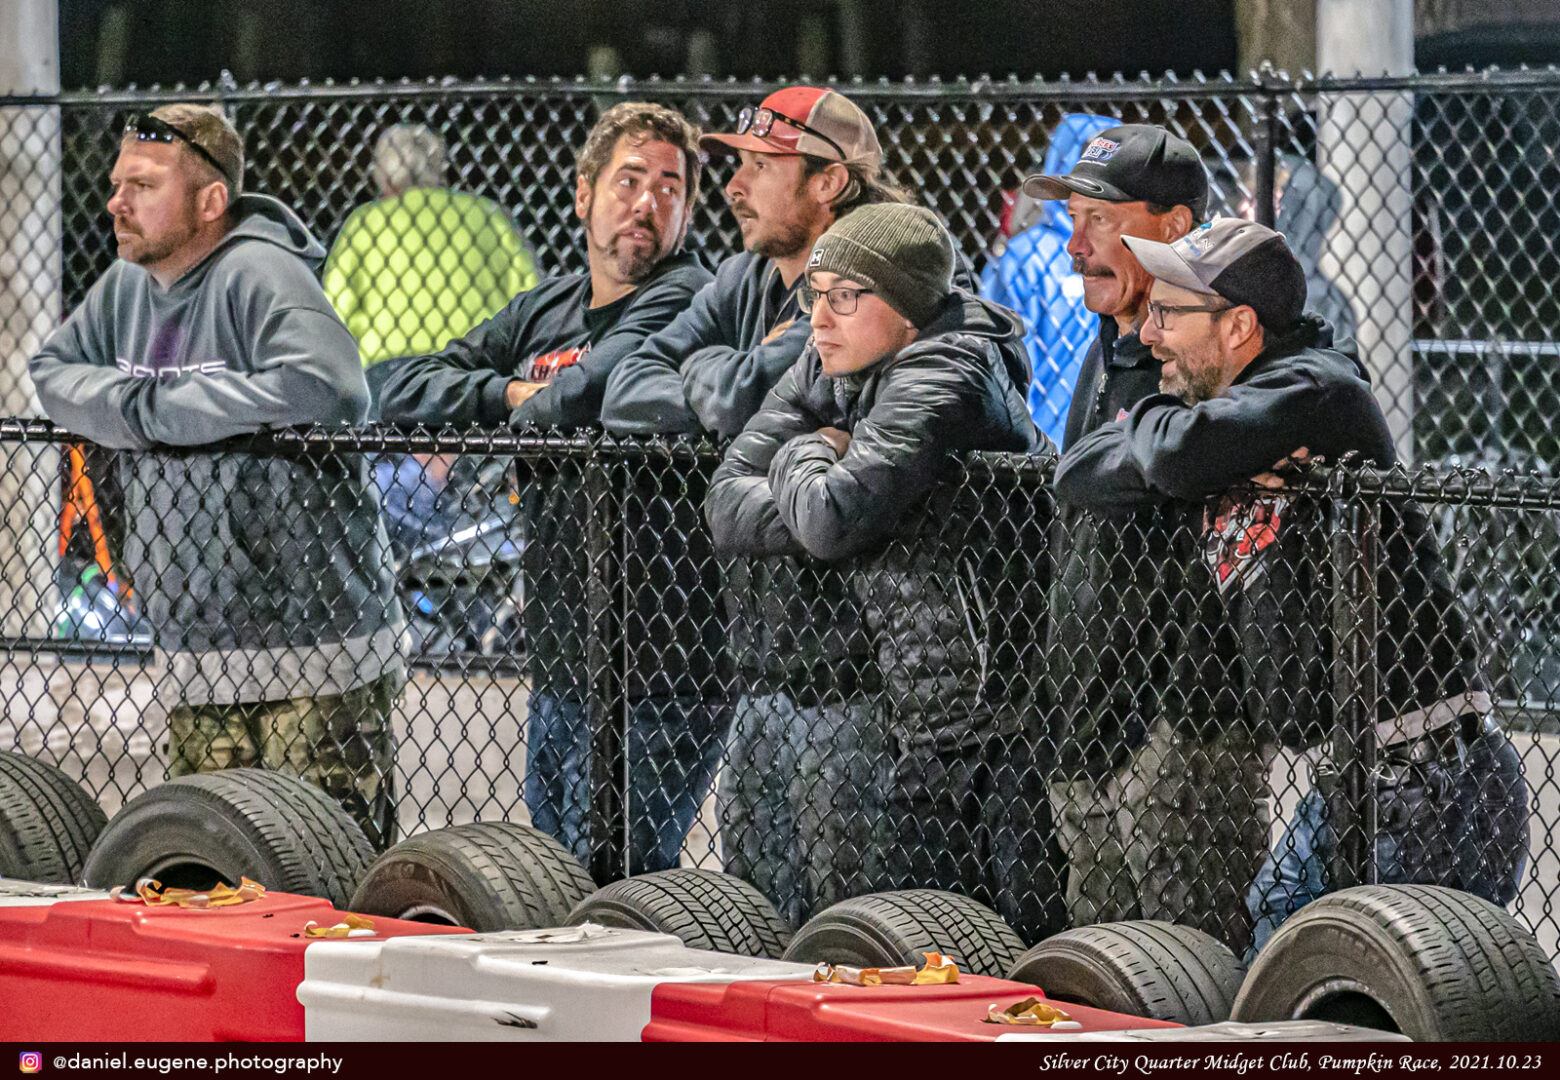 Parents Watching Over the Race From a Fence